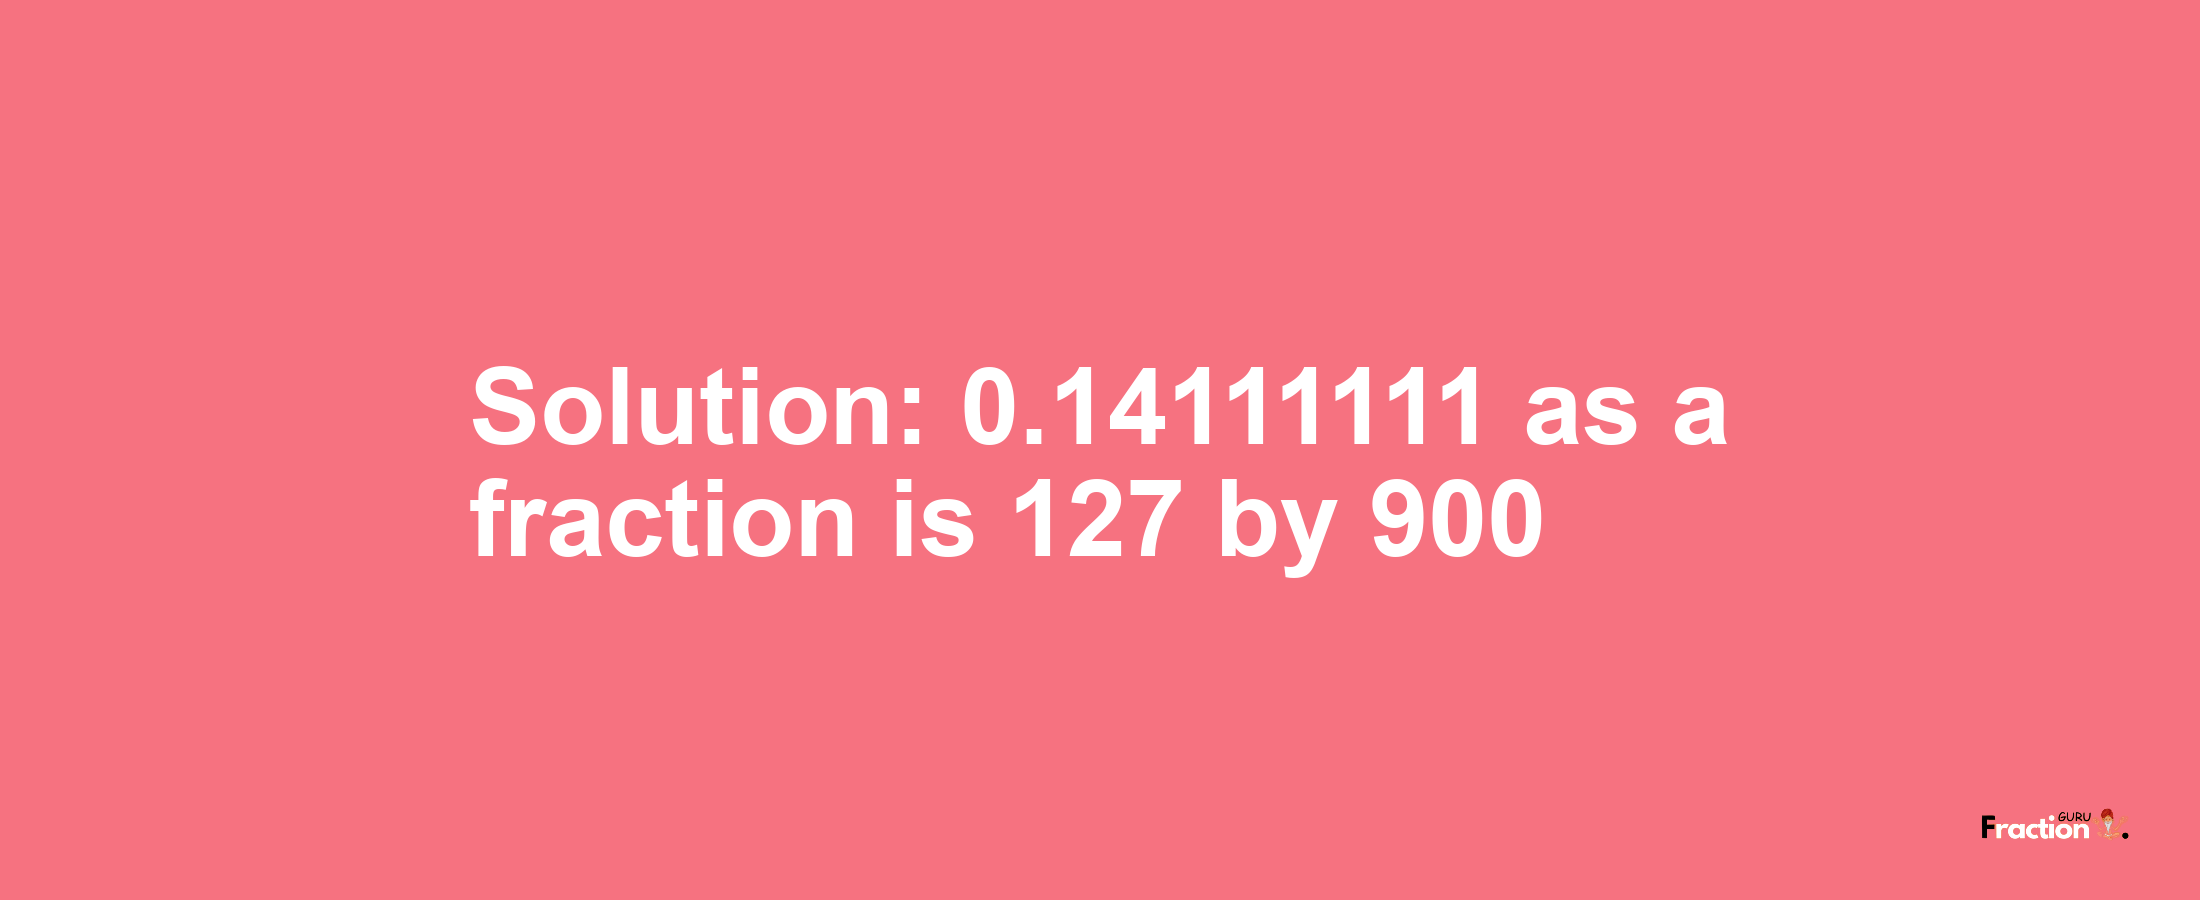 Solution:0.14111111 as a fraction is 127/900